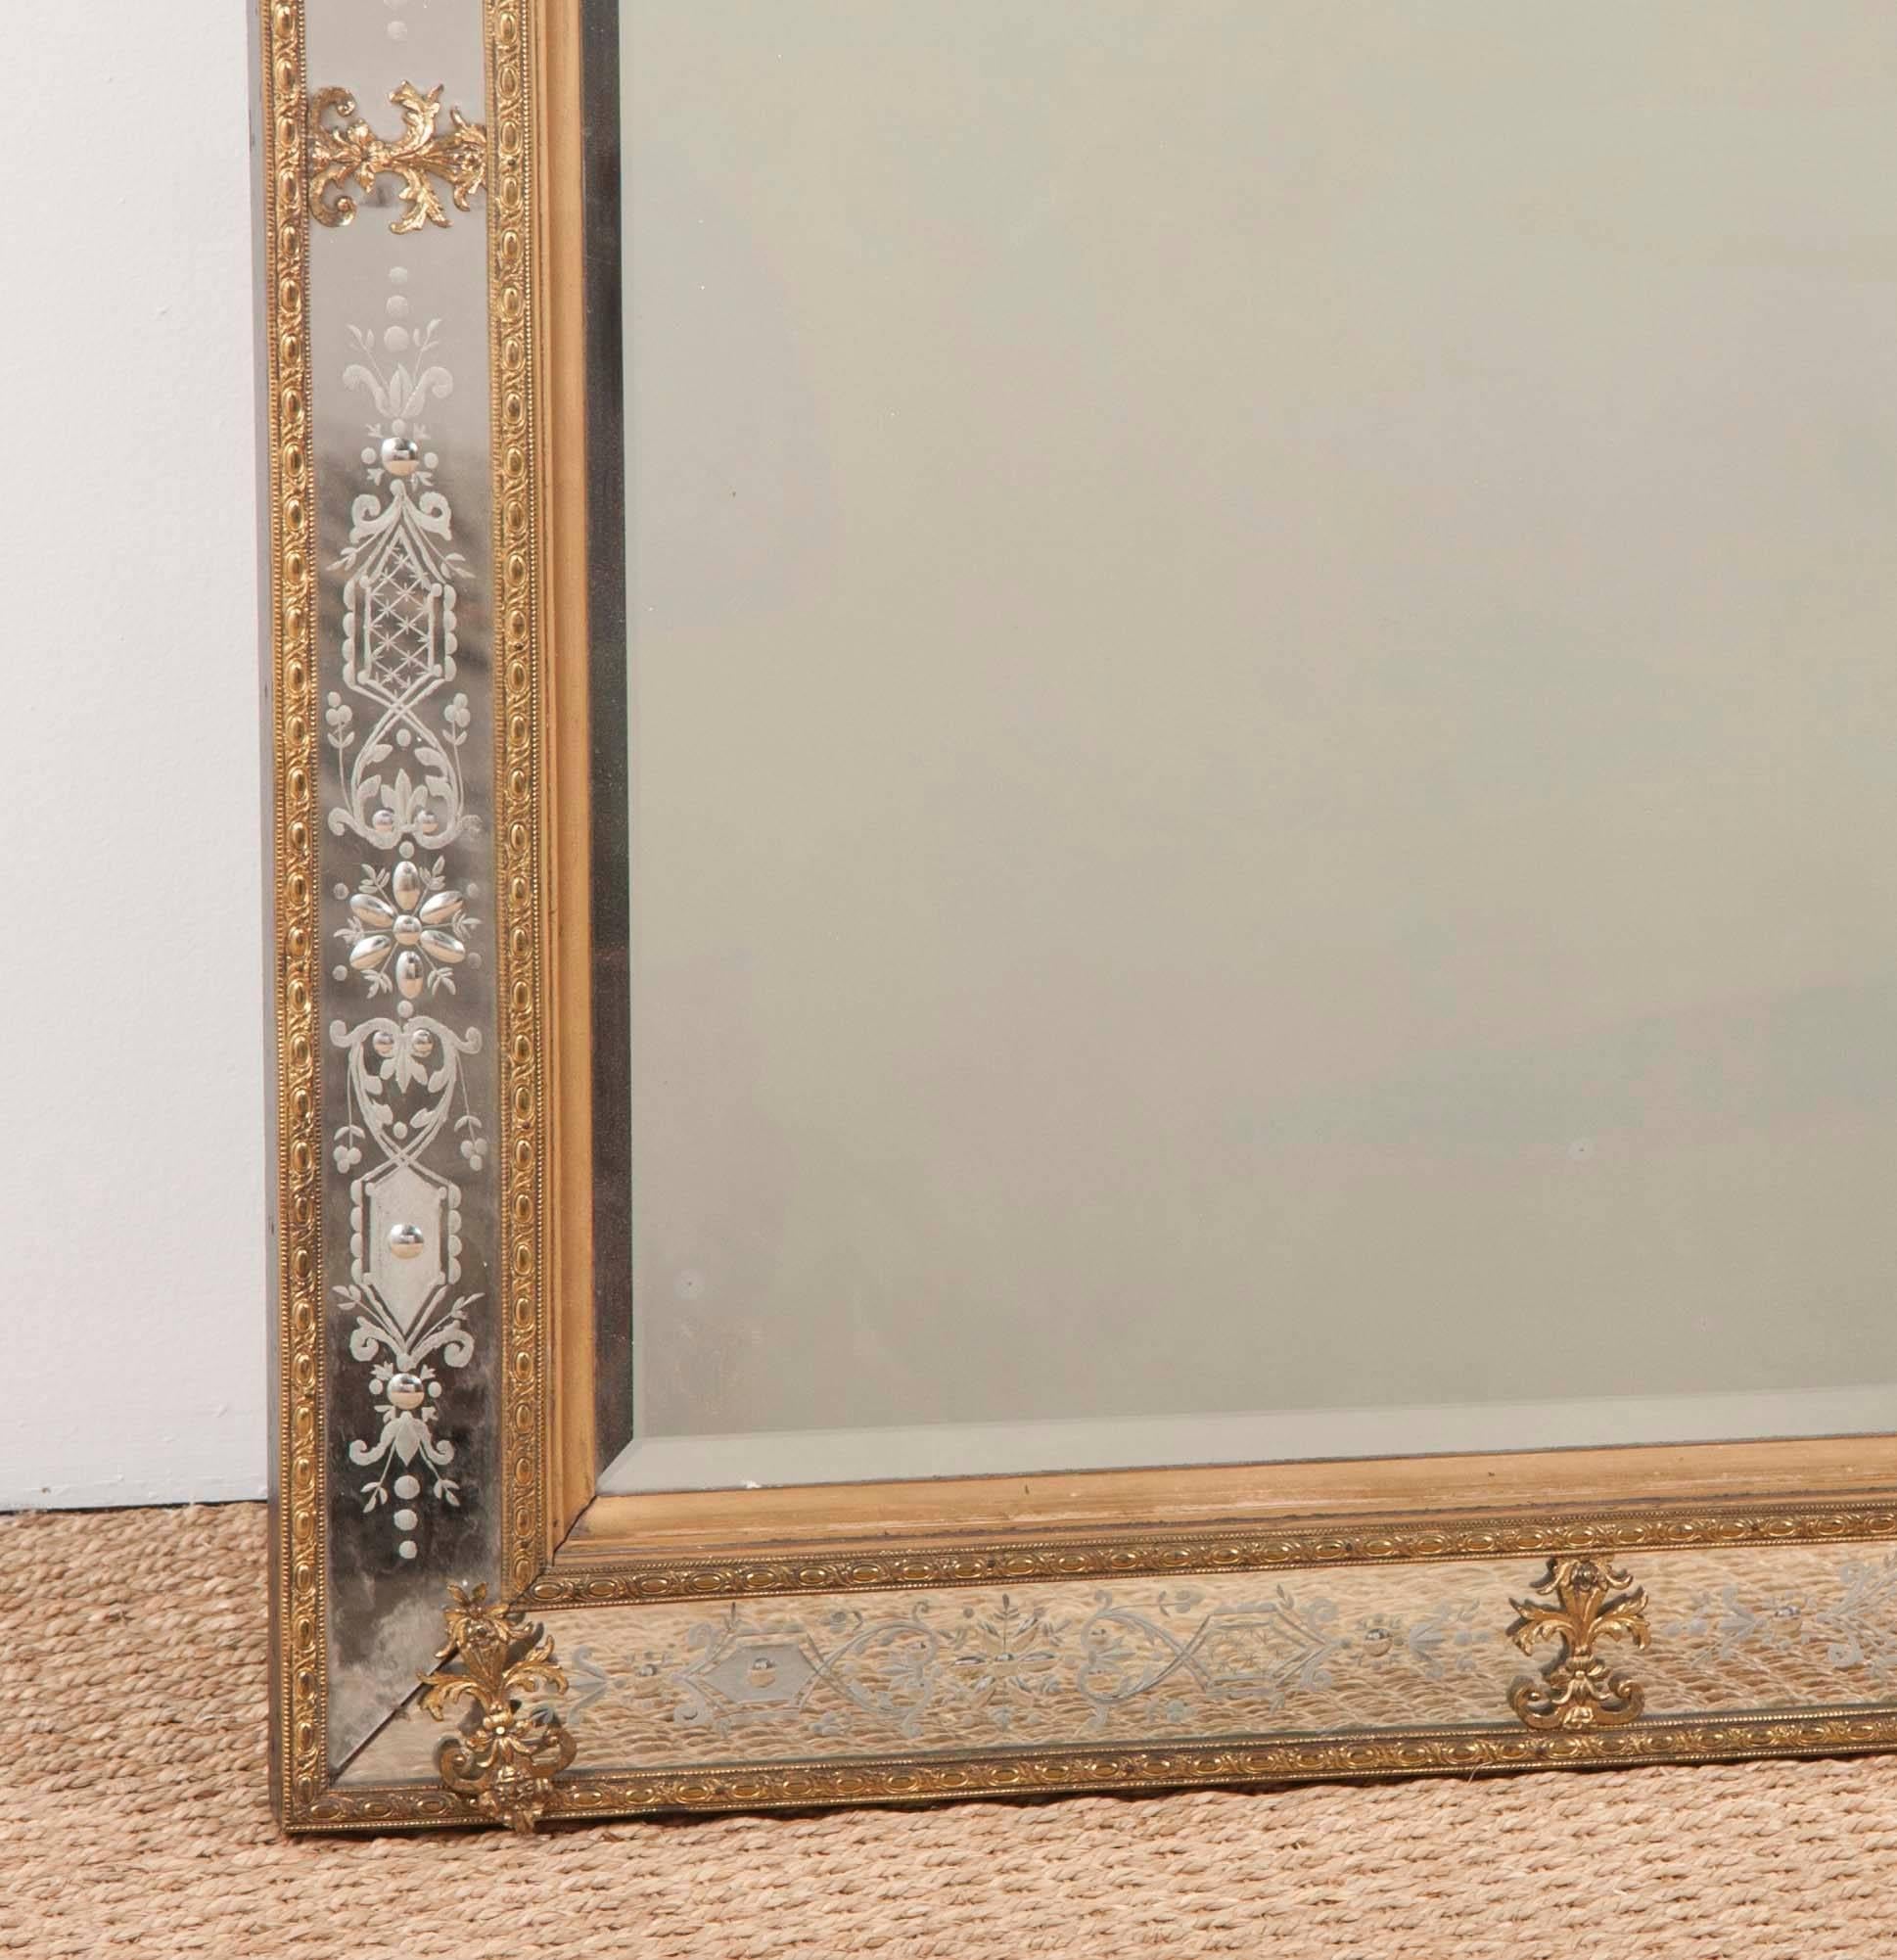 19th Century Matched Pair of Swedish Mirrors after the Model by Gustav Precht